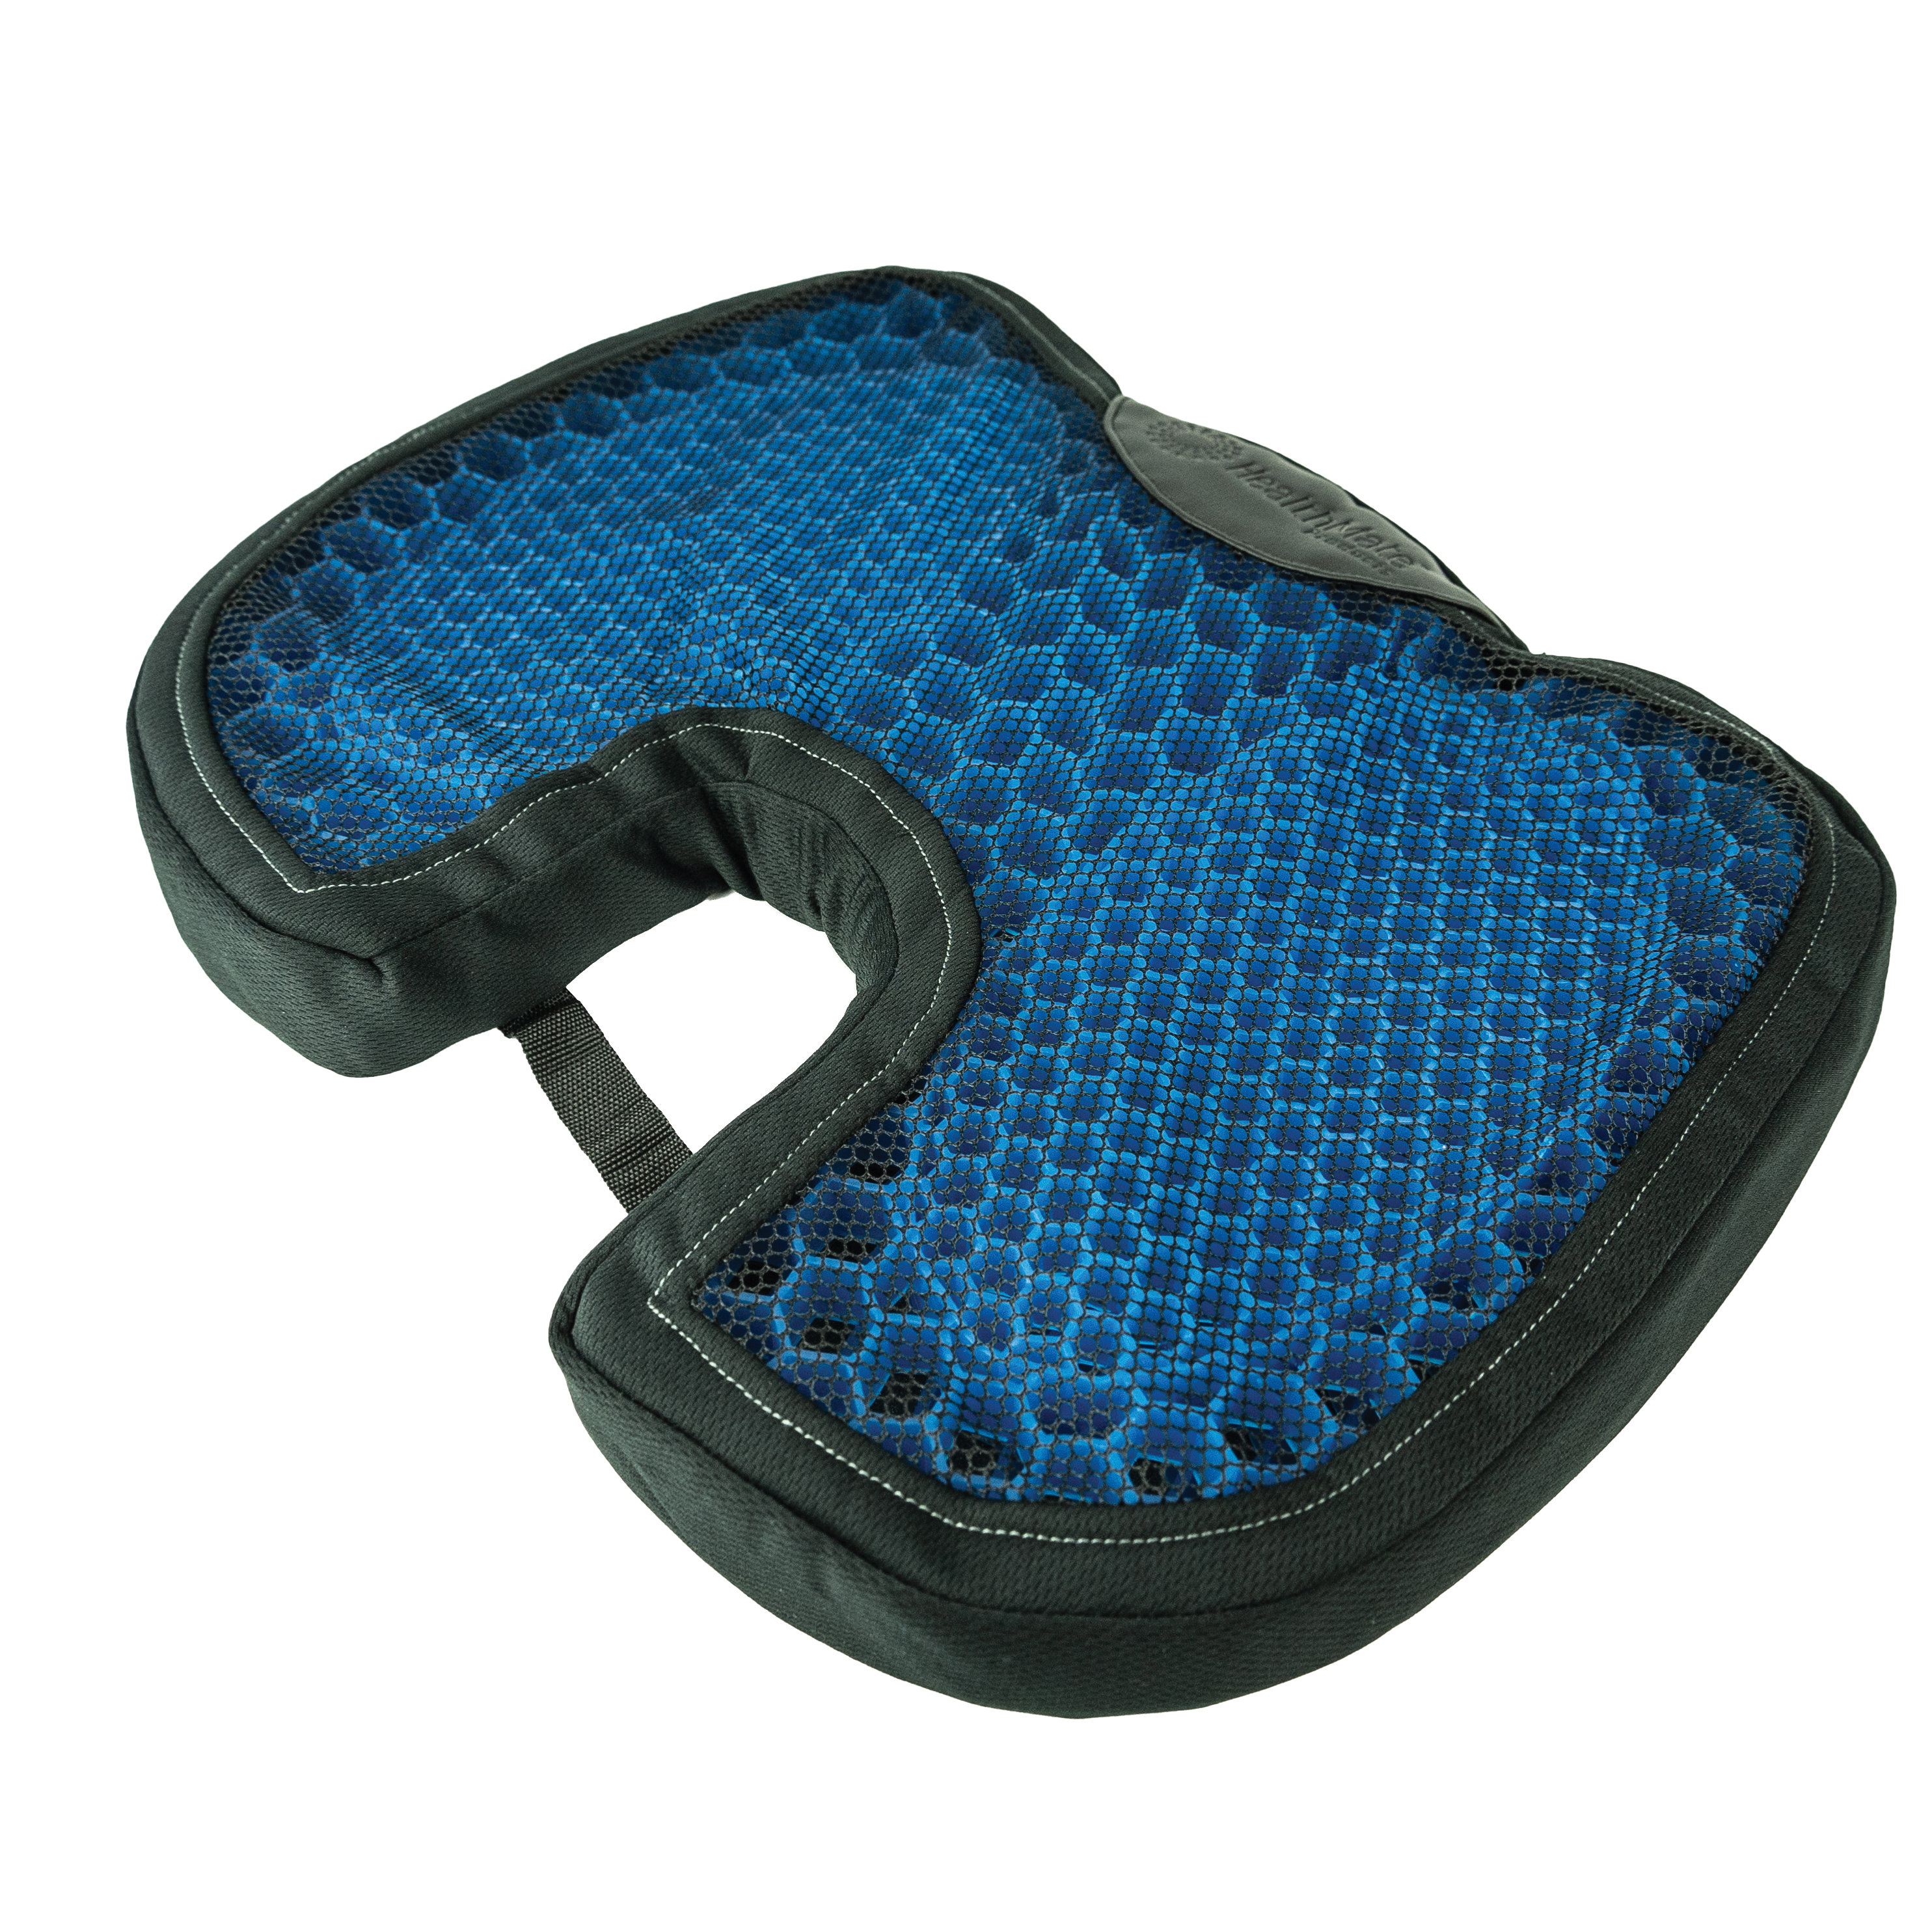 Water Resistant Gel Seat Cushion Pad, 17 x 15 x 1.25 - FOMI Care